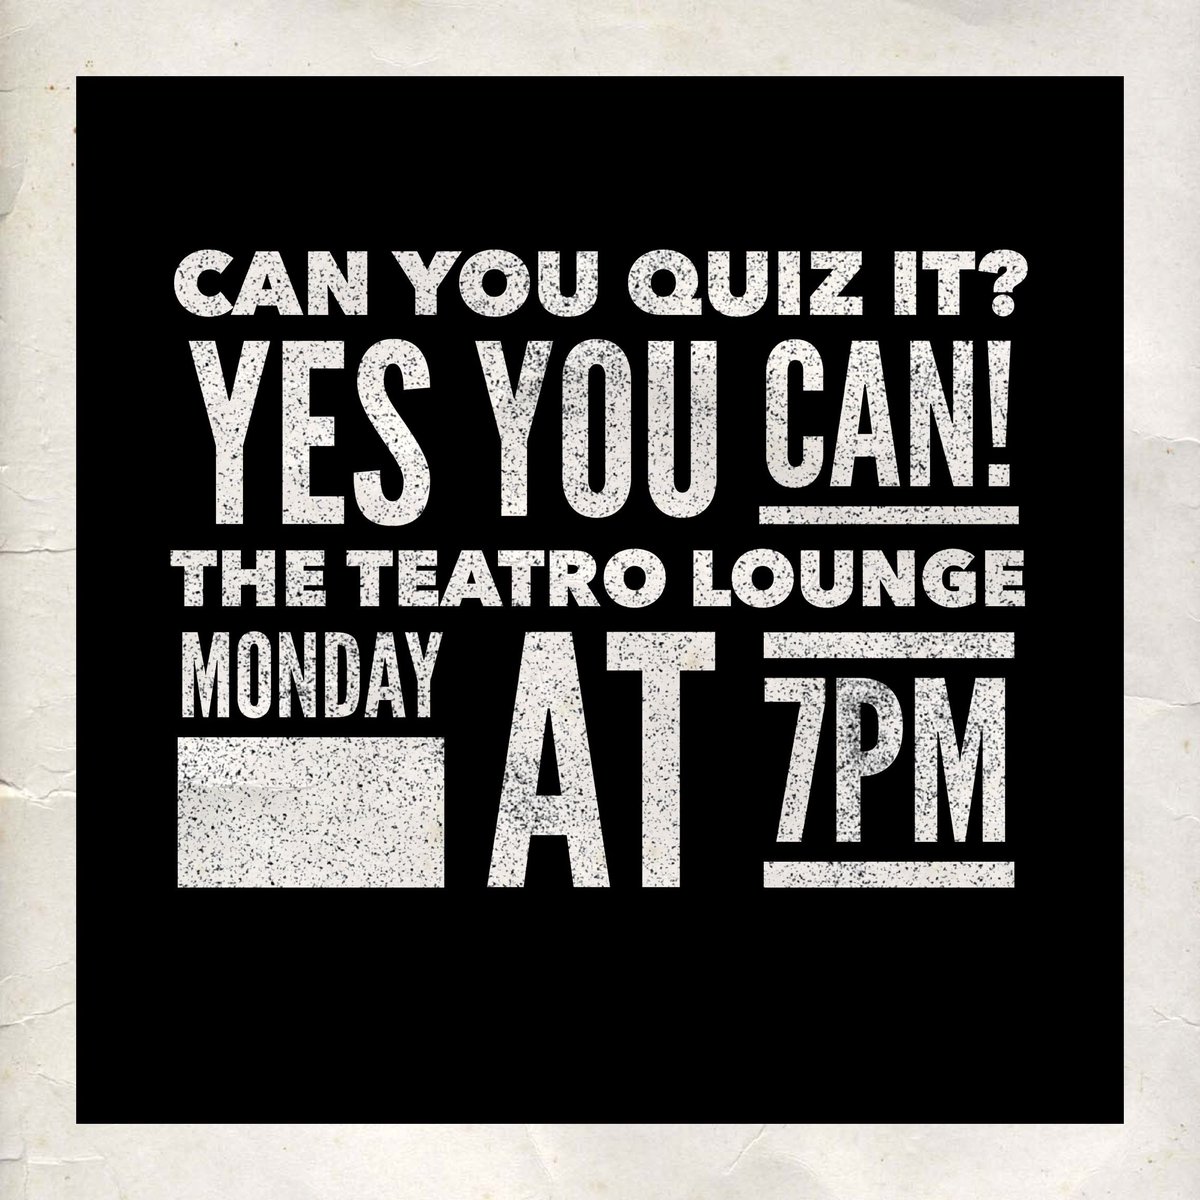 Join us on Monday at #TheTeatroLounge in #Clevedon for our next #QuizNight! 7pm start for our #GeneralKnowledge #Quiz with cash and vouchers to be won